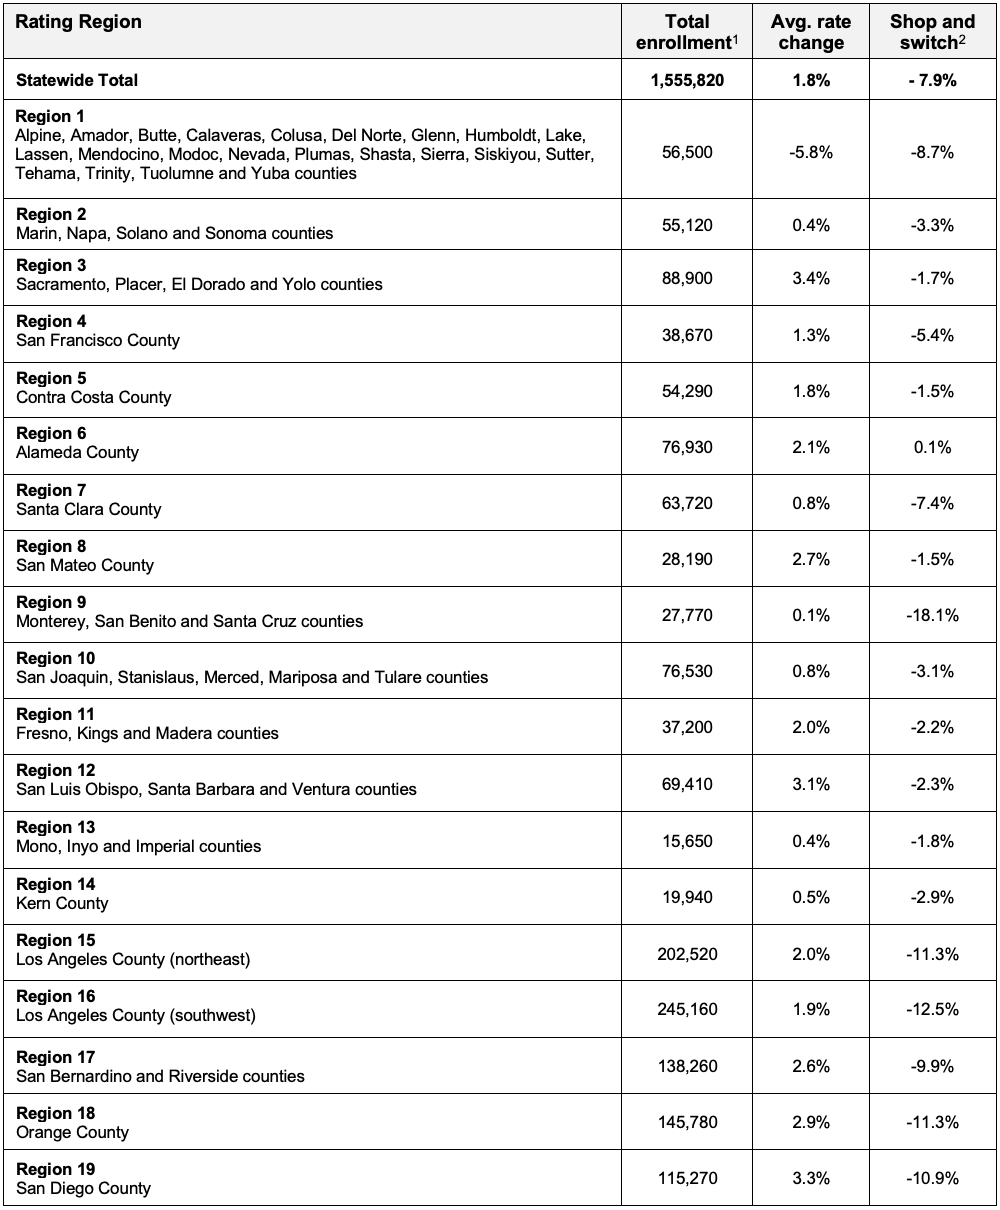 Table 2: California Individual Market Rate Changes by Rating Region